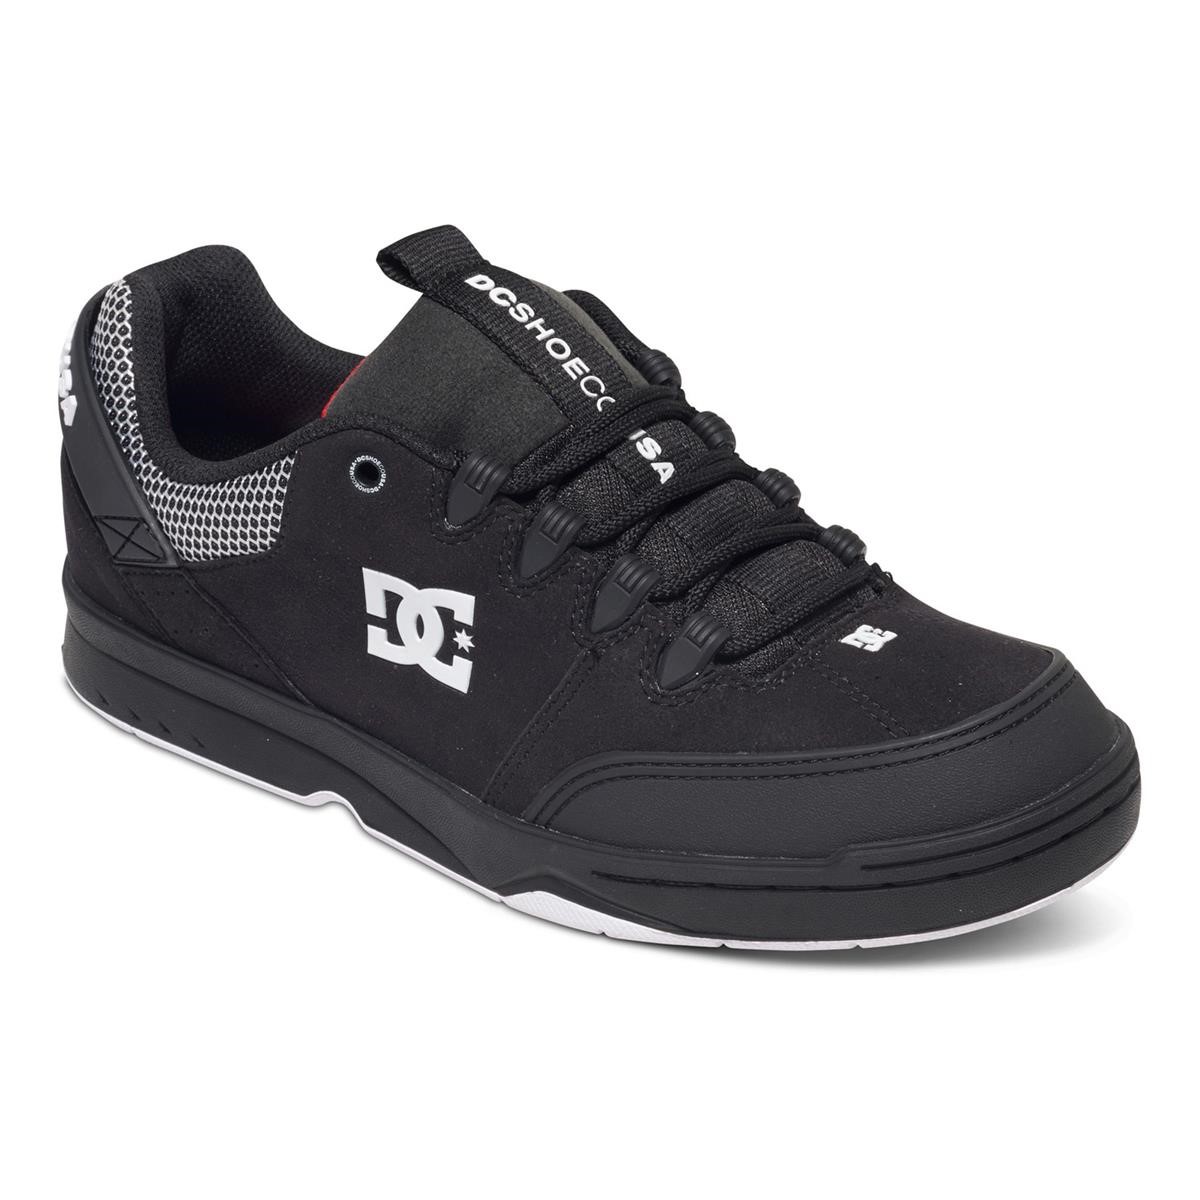 DC Chaussures Syntax SN Black/White/Red